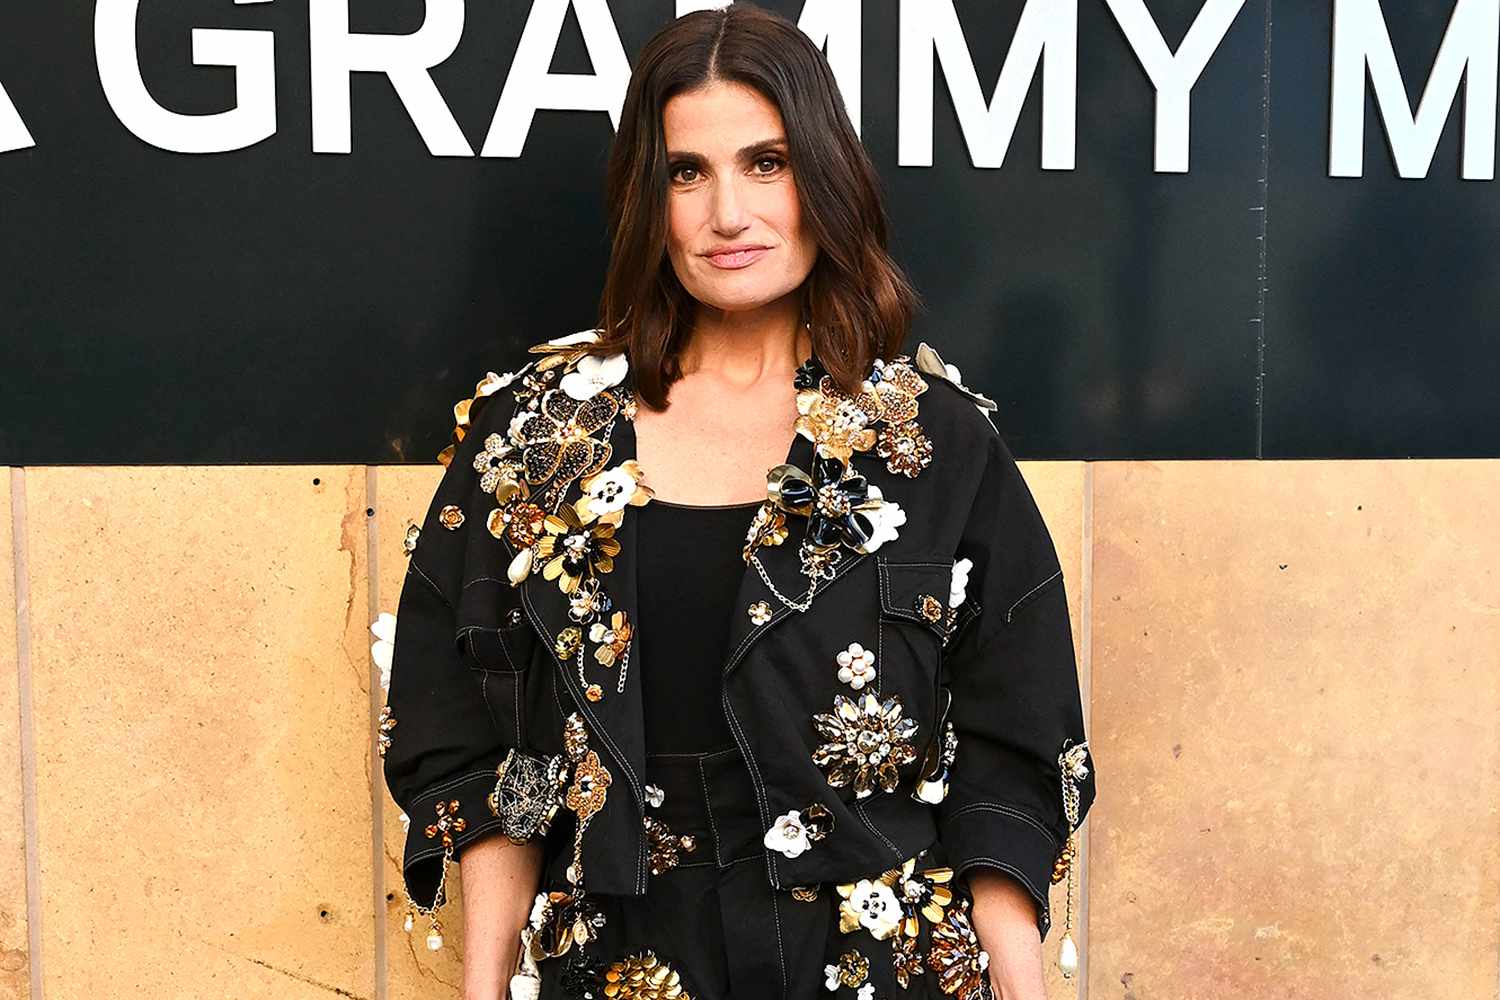 Idina Menzel at A Conversation with Idina Menzel at The GRAMMY Museum on August 22, 2023 in Los Angeles, California 